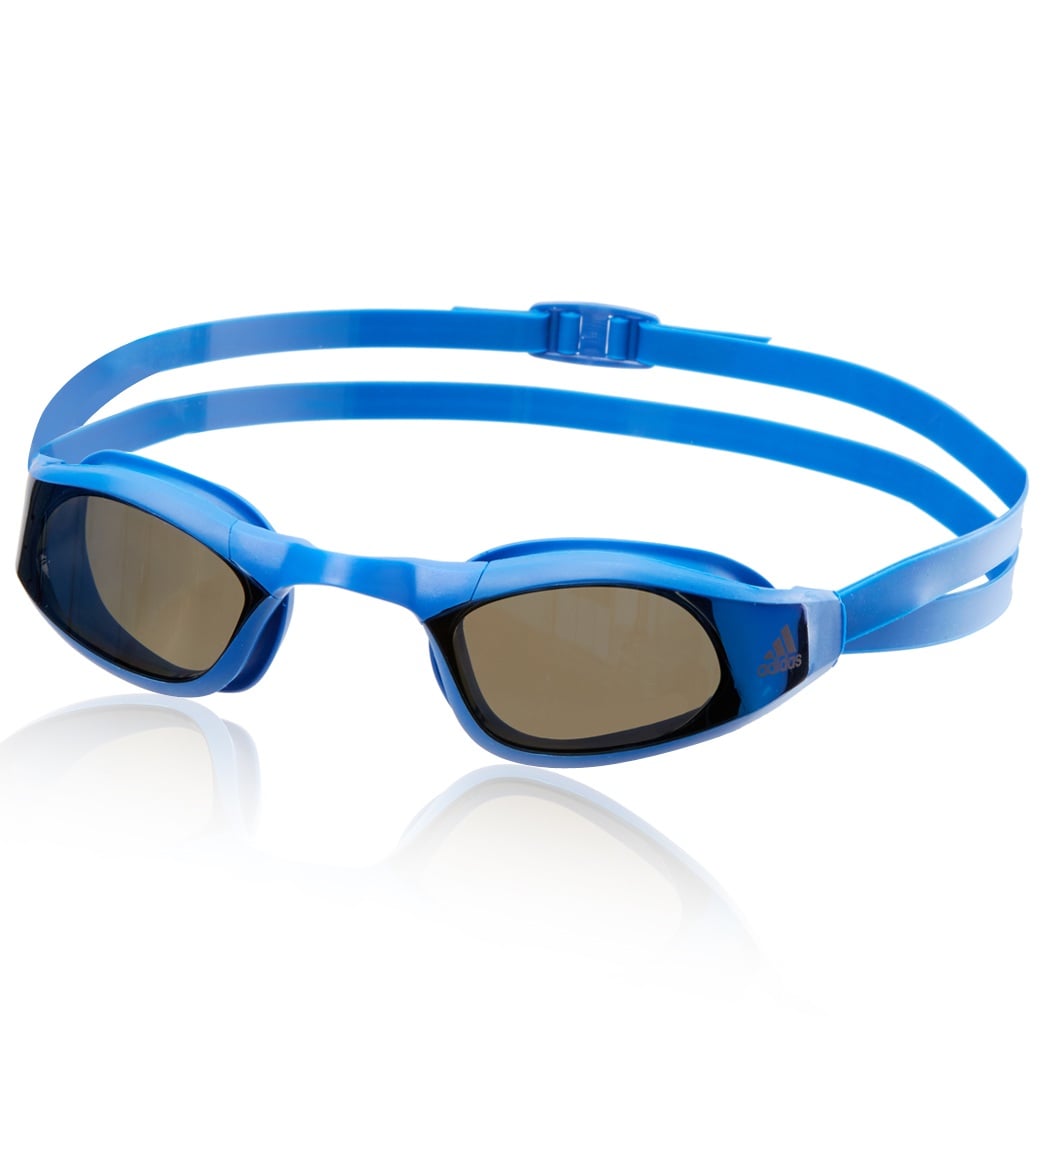 Persistar Race Mirrored Goggle at SwimOutlet.com